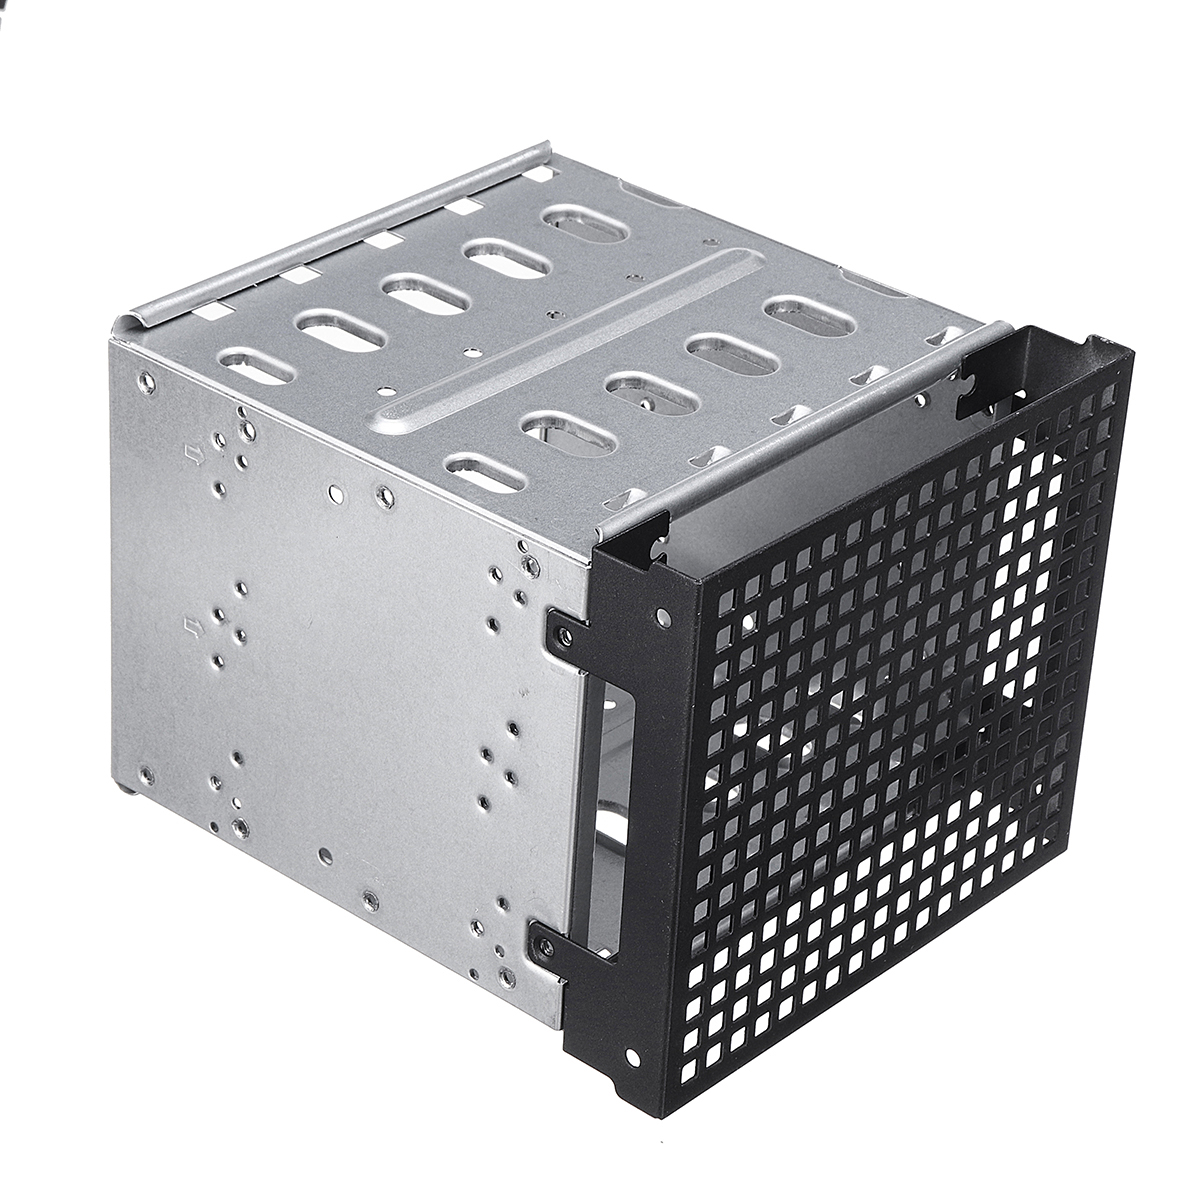 5.25" to 5x 3.5" SATA SAS HDD Cage Rack Hard Drive Tray Caddy Converter with Fan Space 13